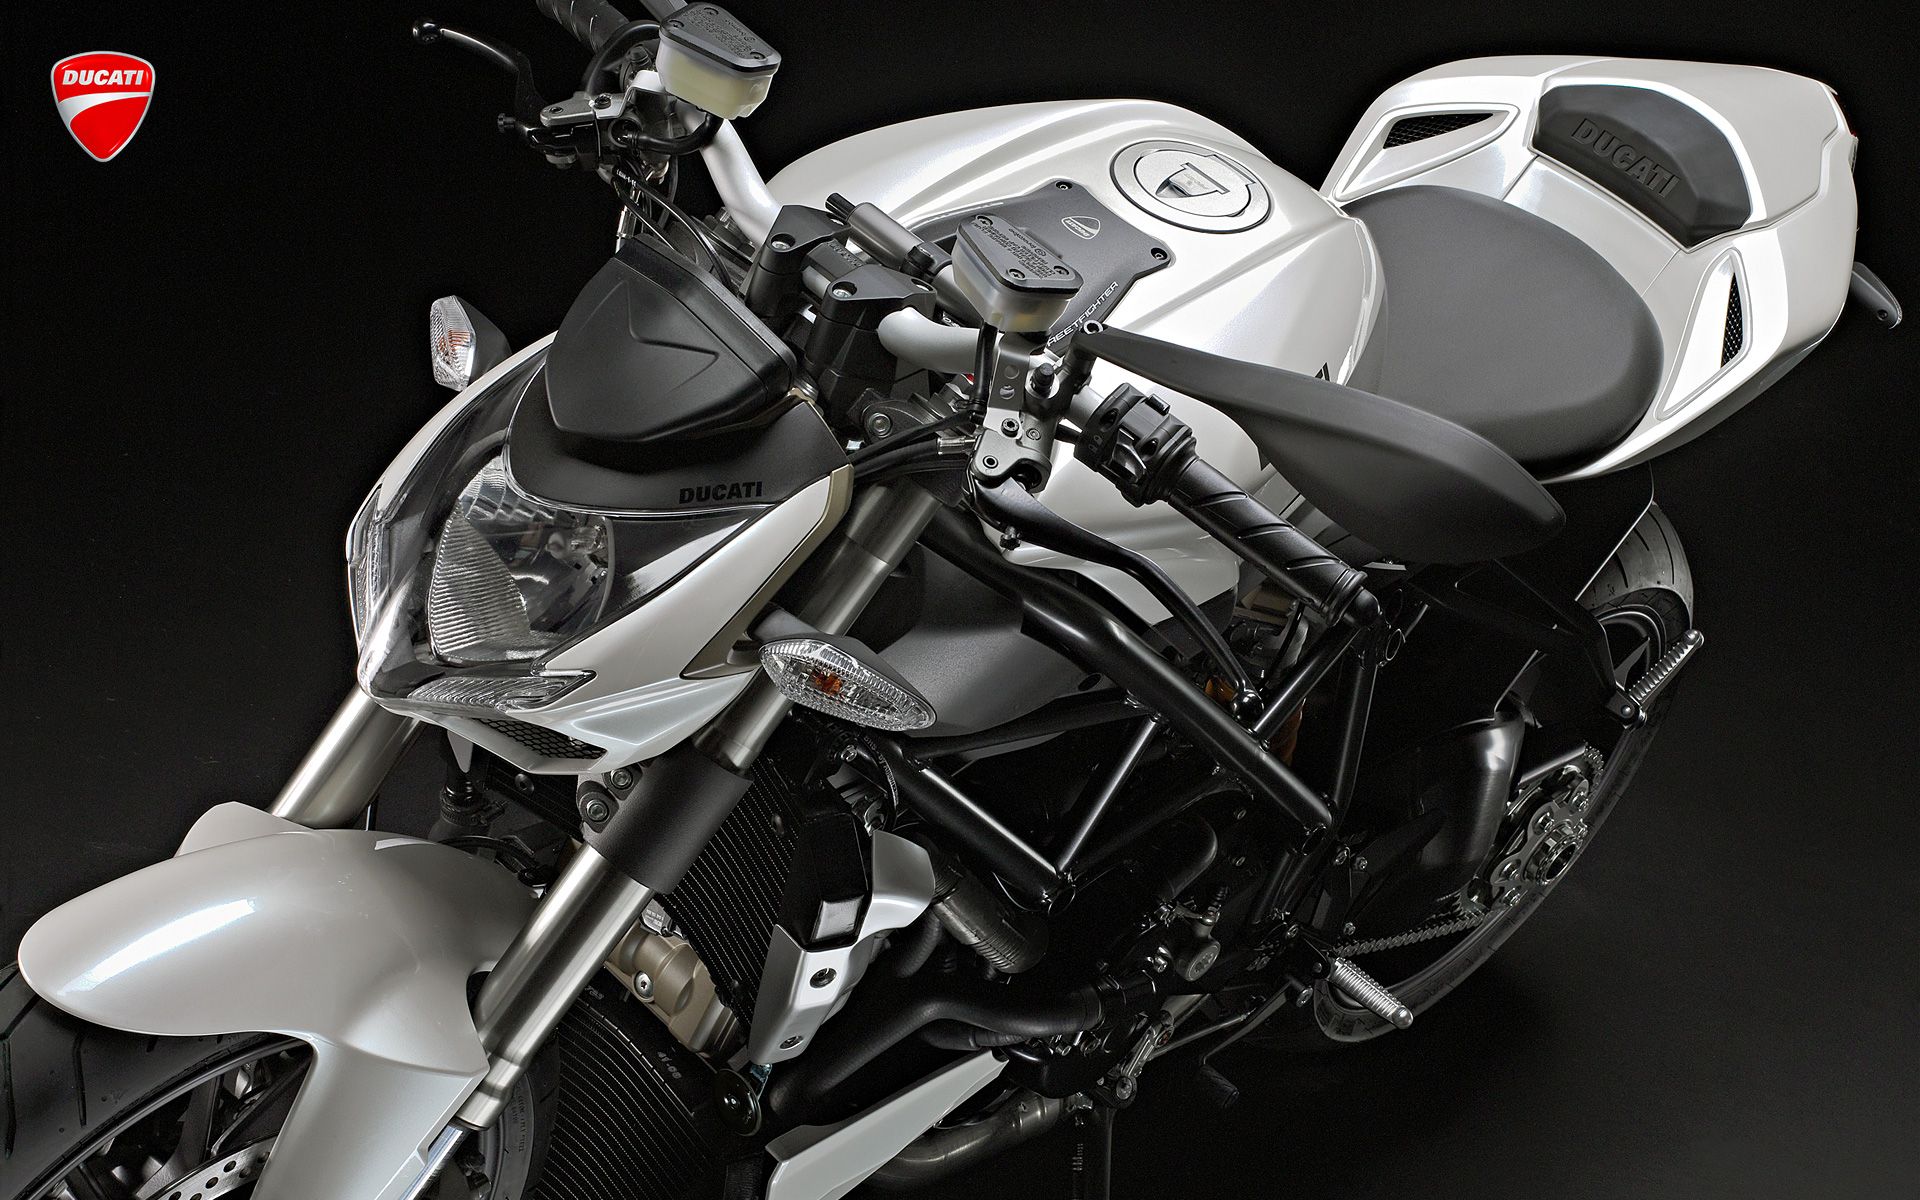 Ducati Streetfighter Wallpaper Hd | Best and Cool Wallpapers HD